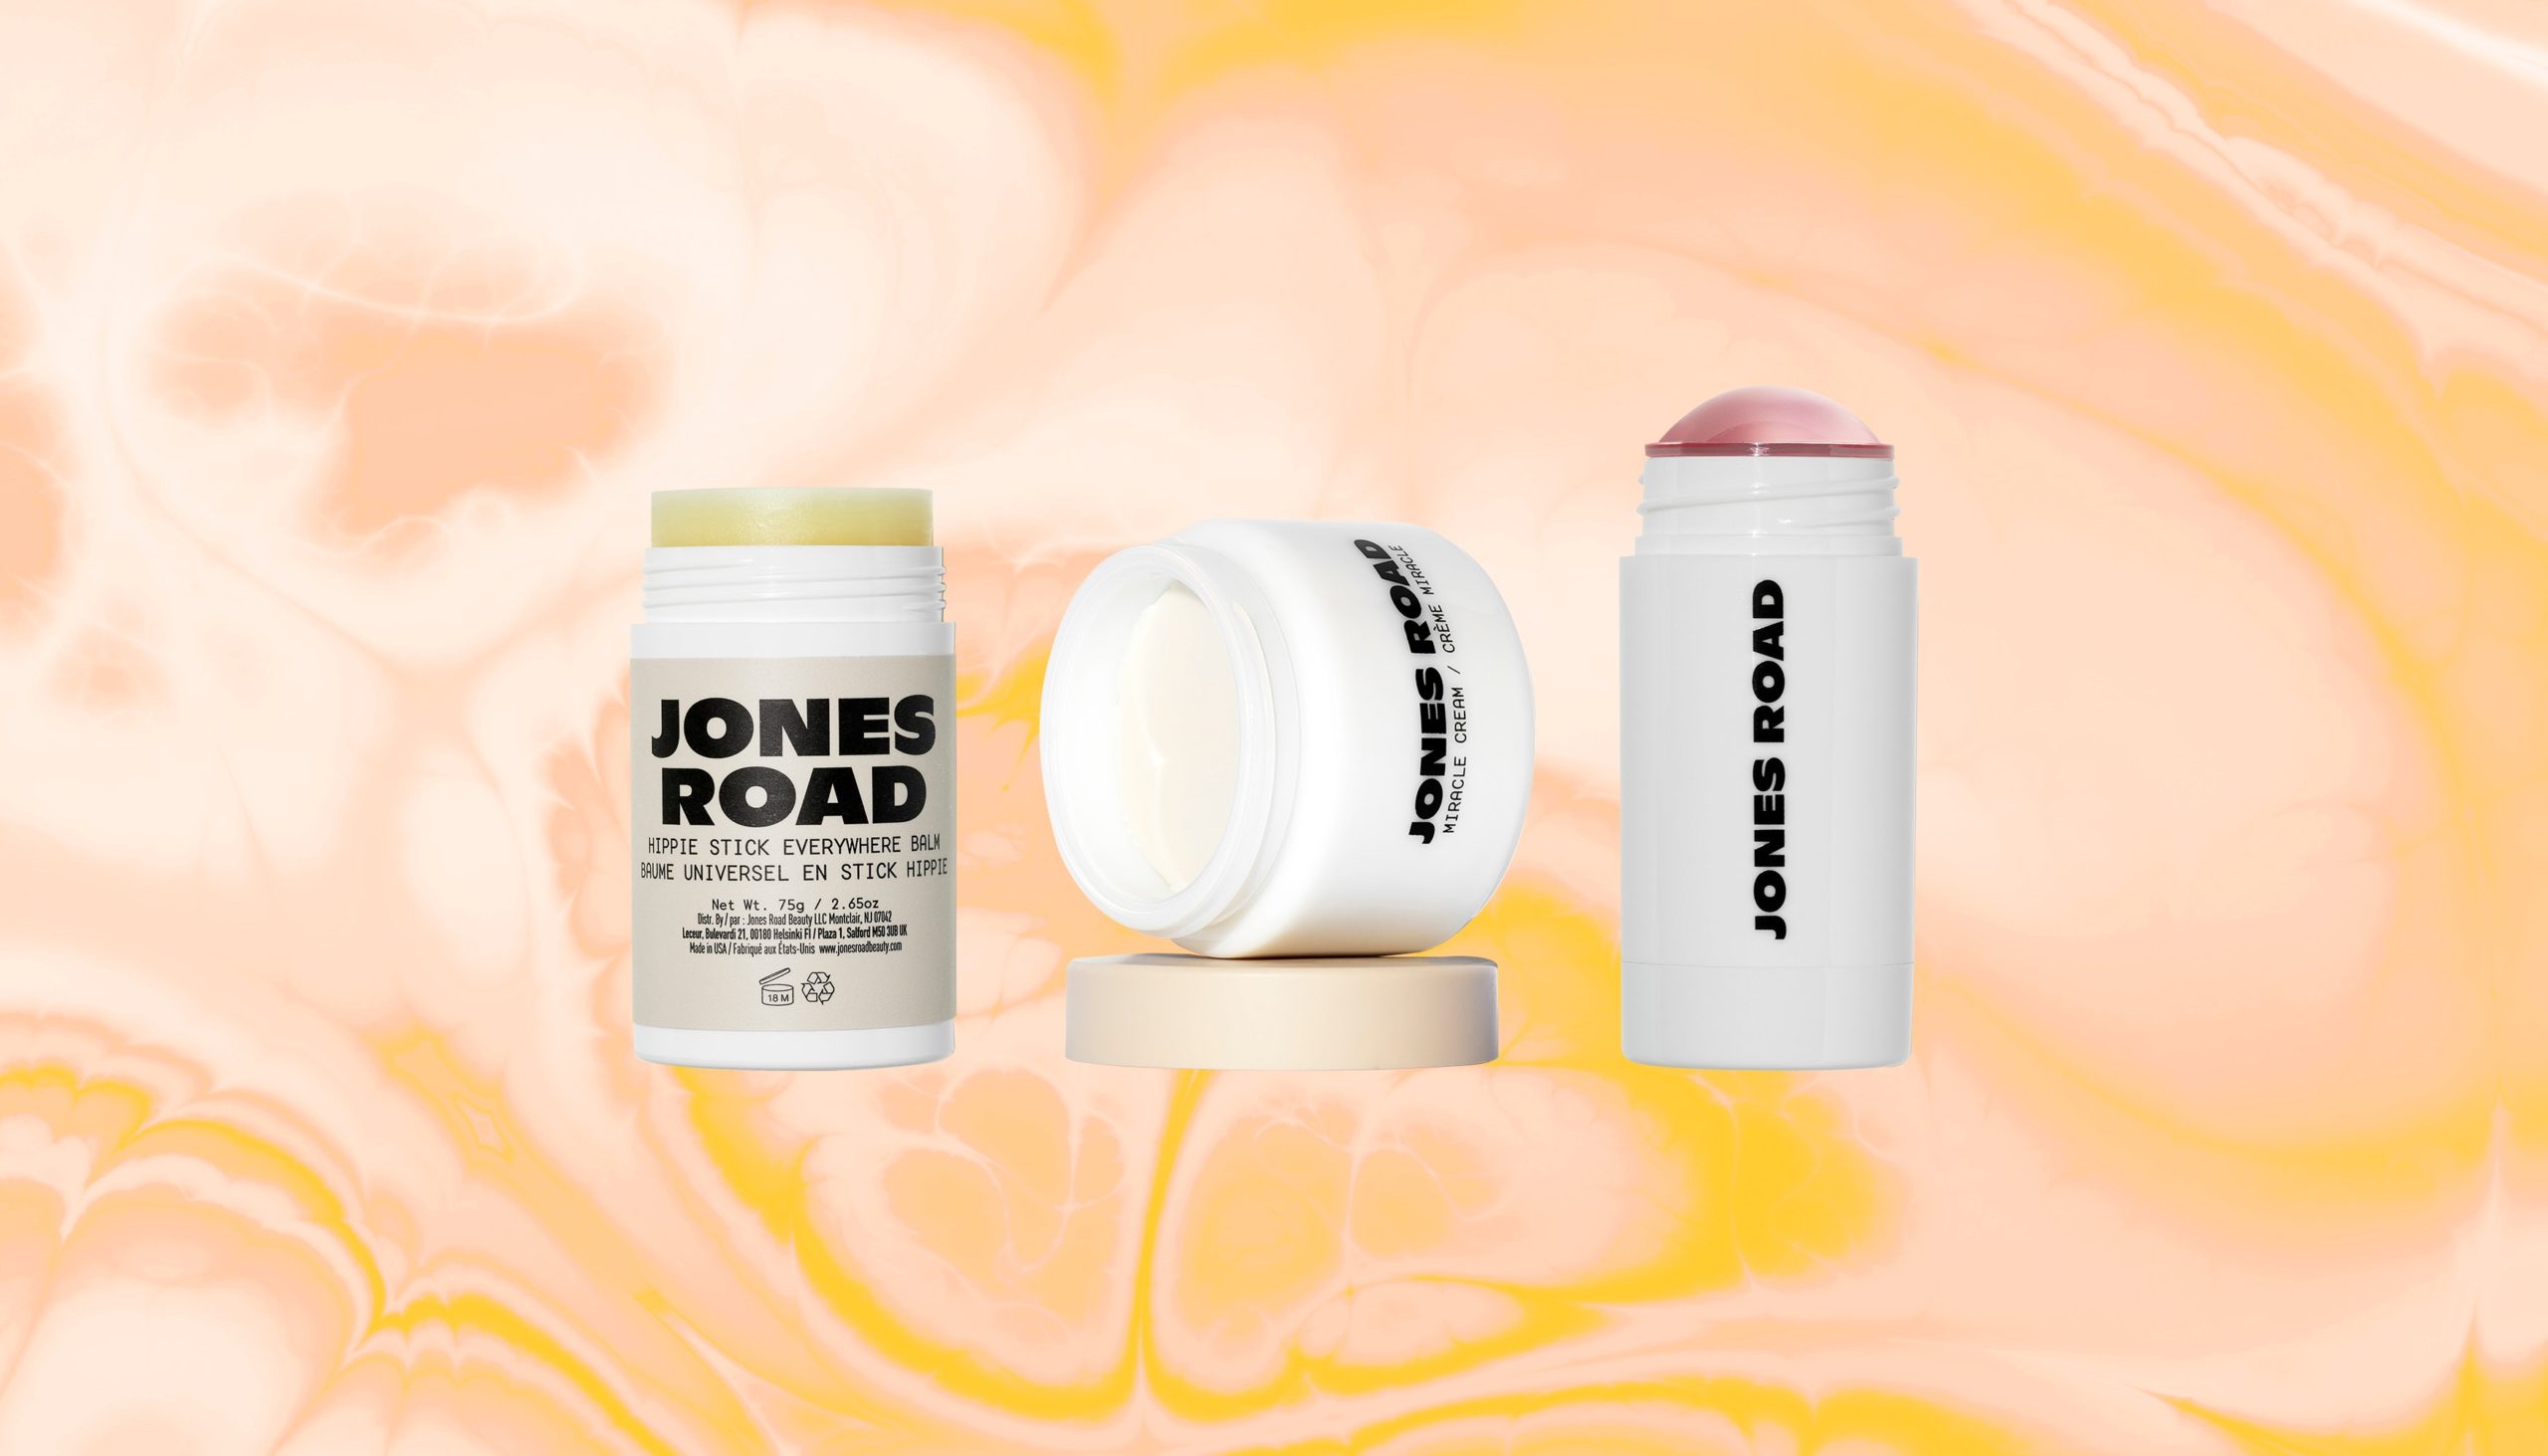 Jones Road's New Skin-Care Products Made Me So Freakin' Dewy